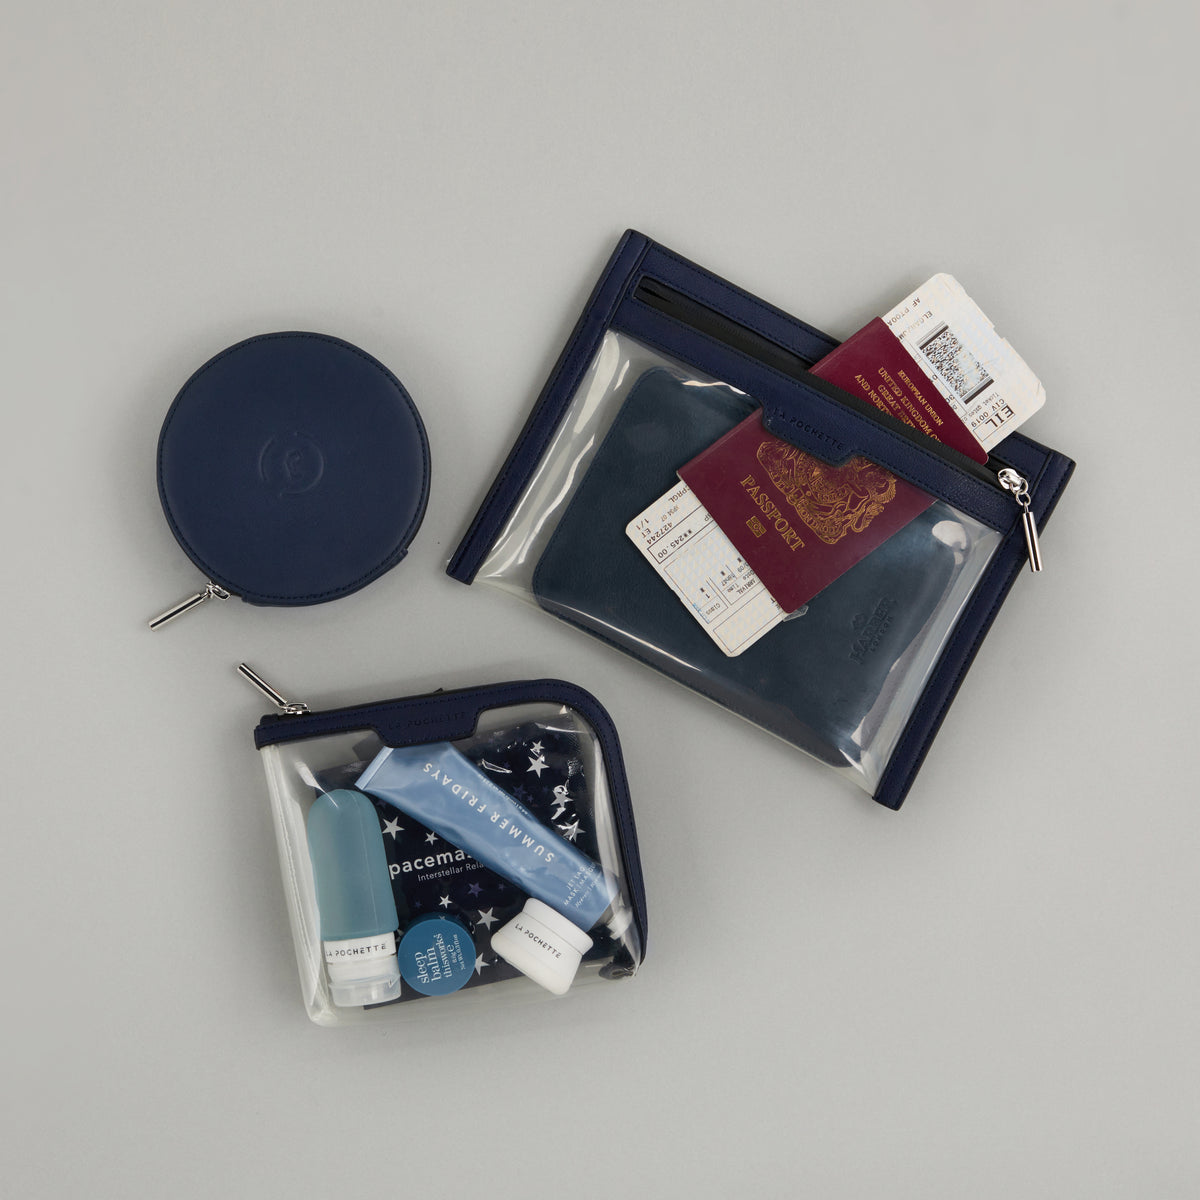 Anywhere Everywhere Wallet in Midnight Ink colourway containing a passport next to Small Anywhere Everywhere Pouch in Midnight Ink colourway holding La Pochette silicone travel bottles. Featured with Circle Purse in Midnight Ink